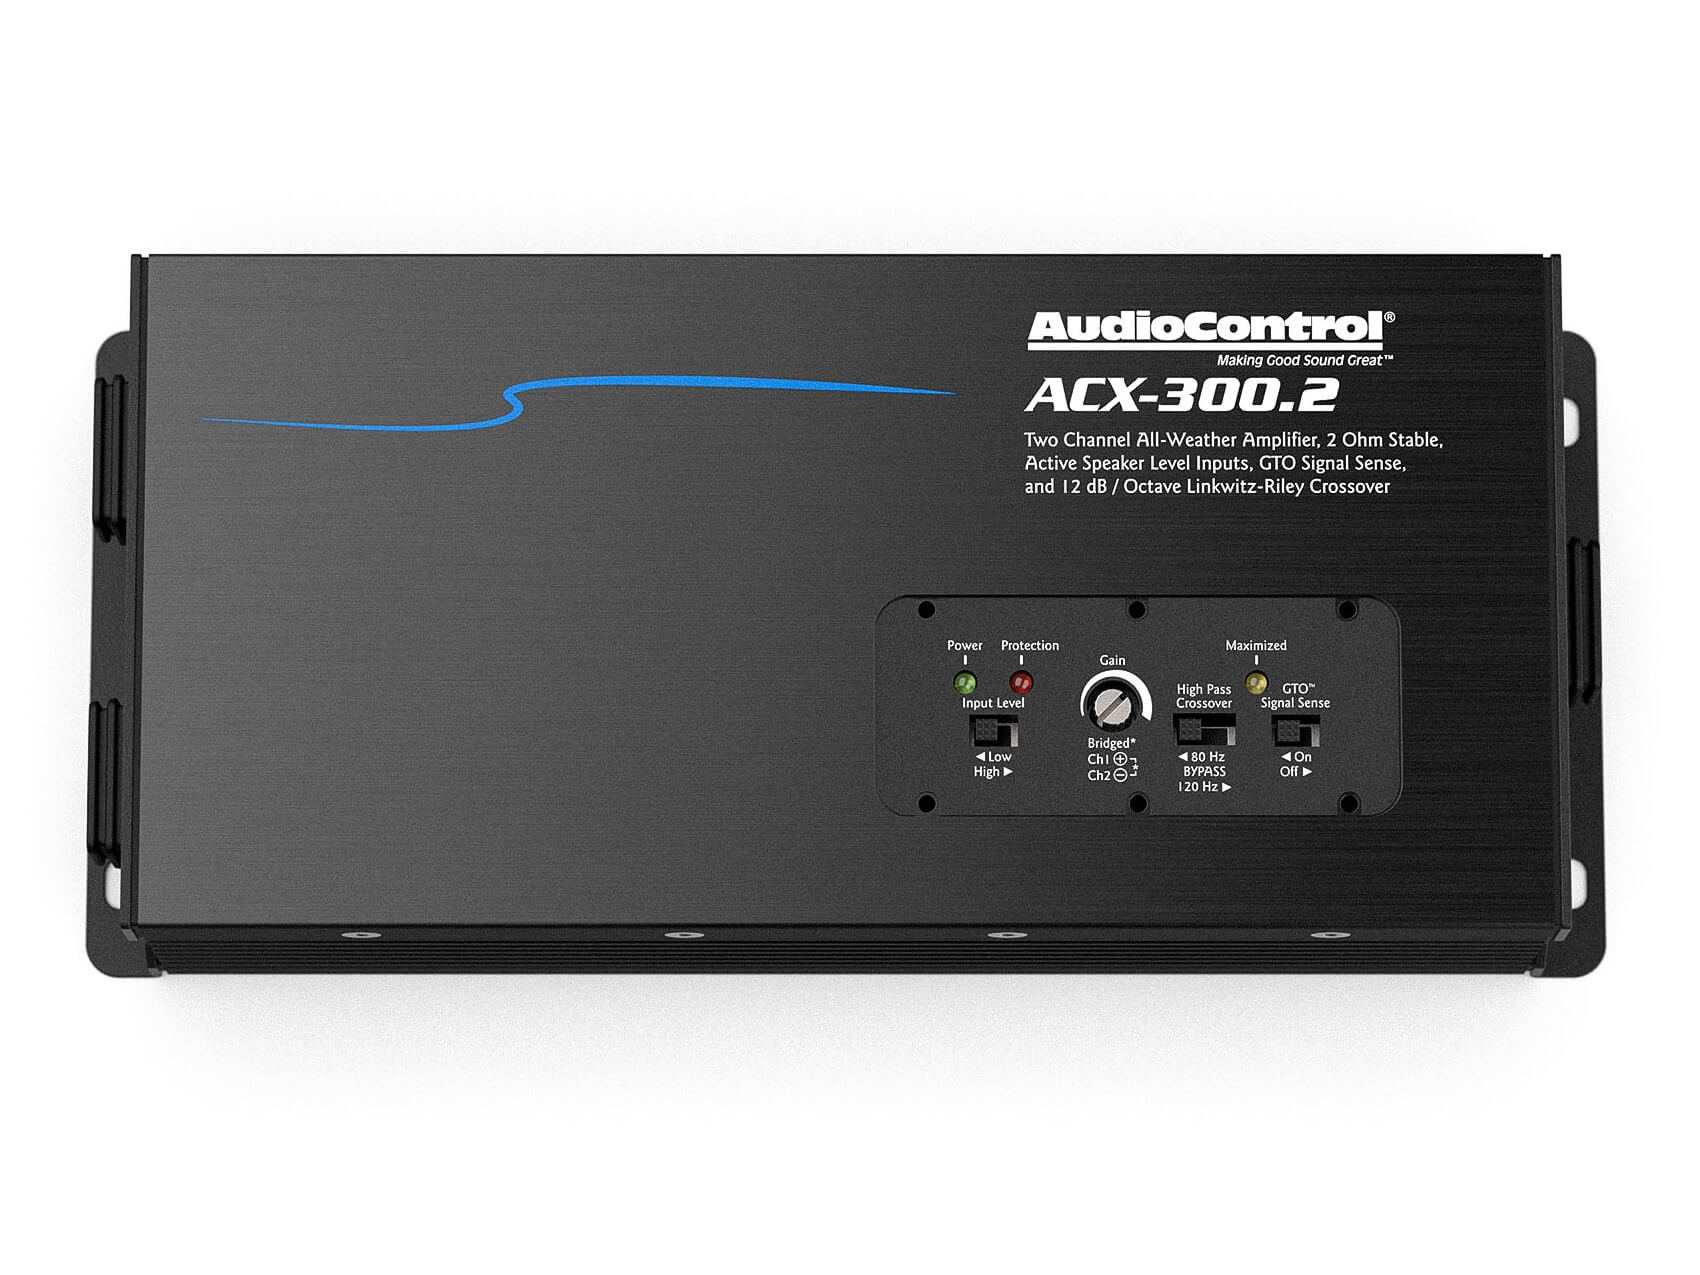 AudioControl ACX-300.2 - Top / Without Cover